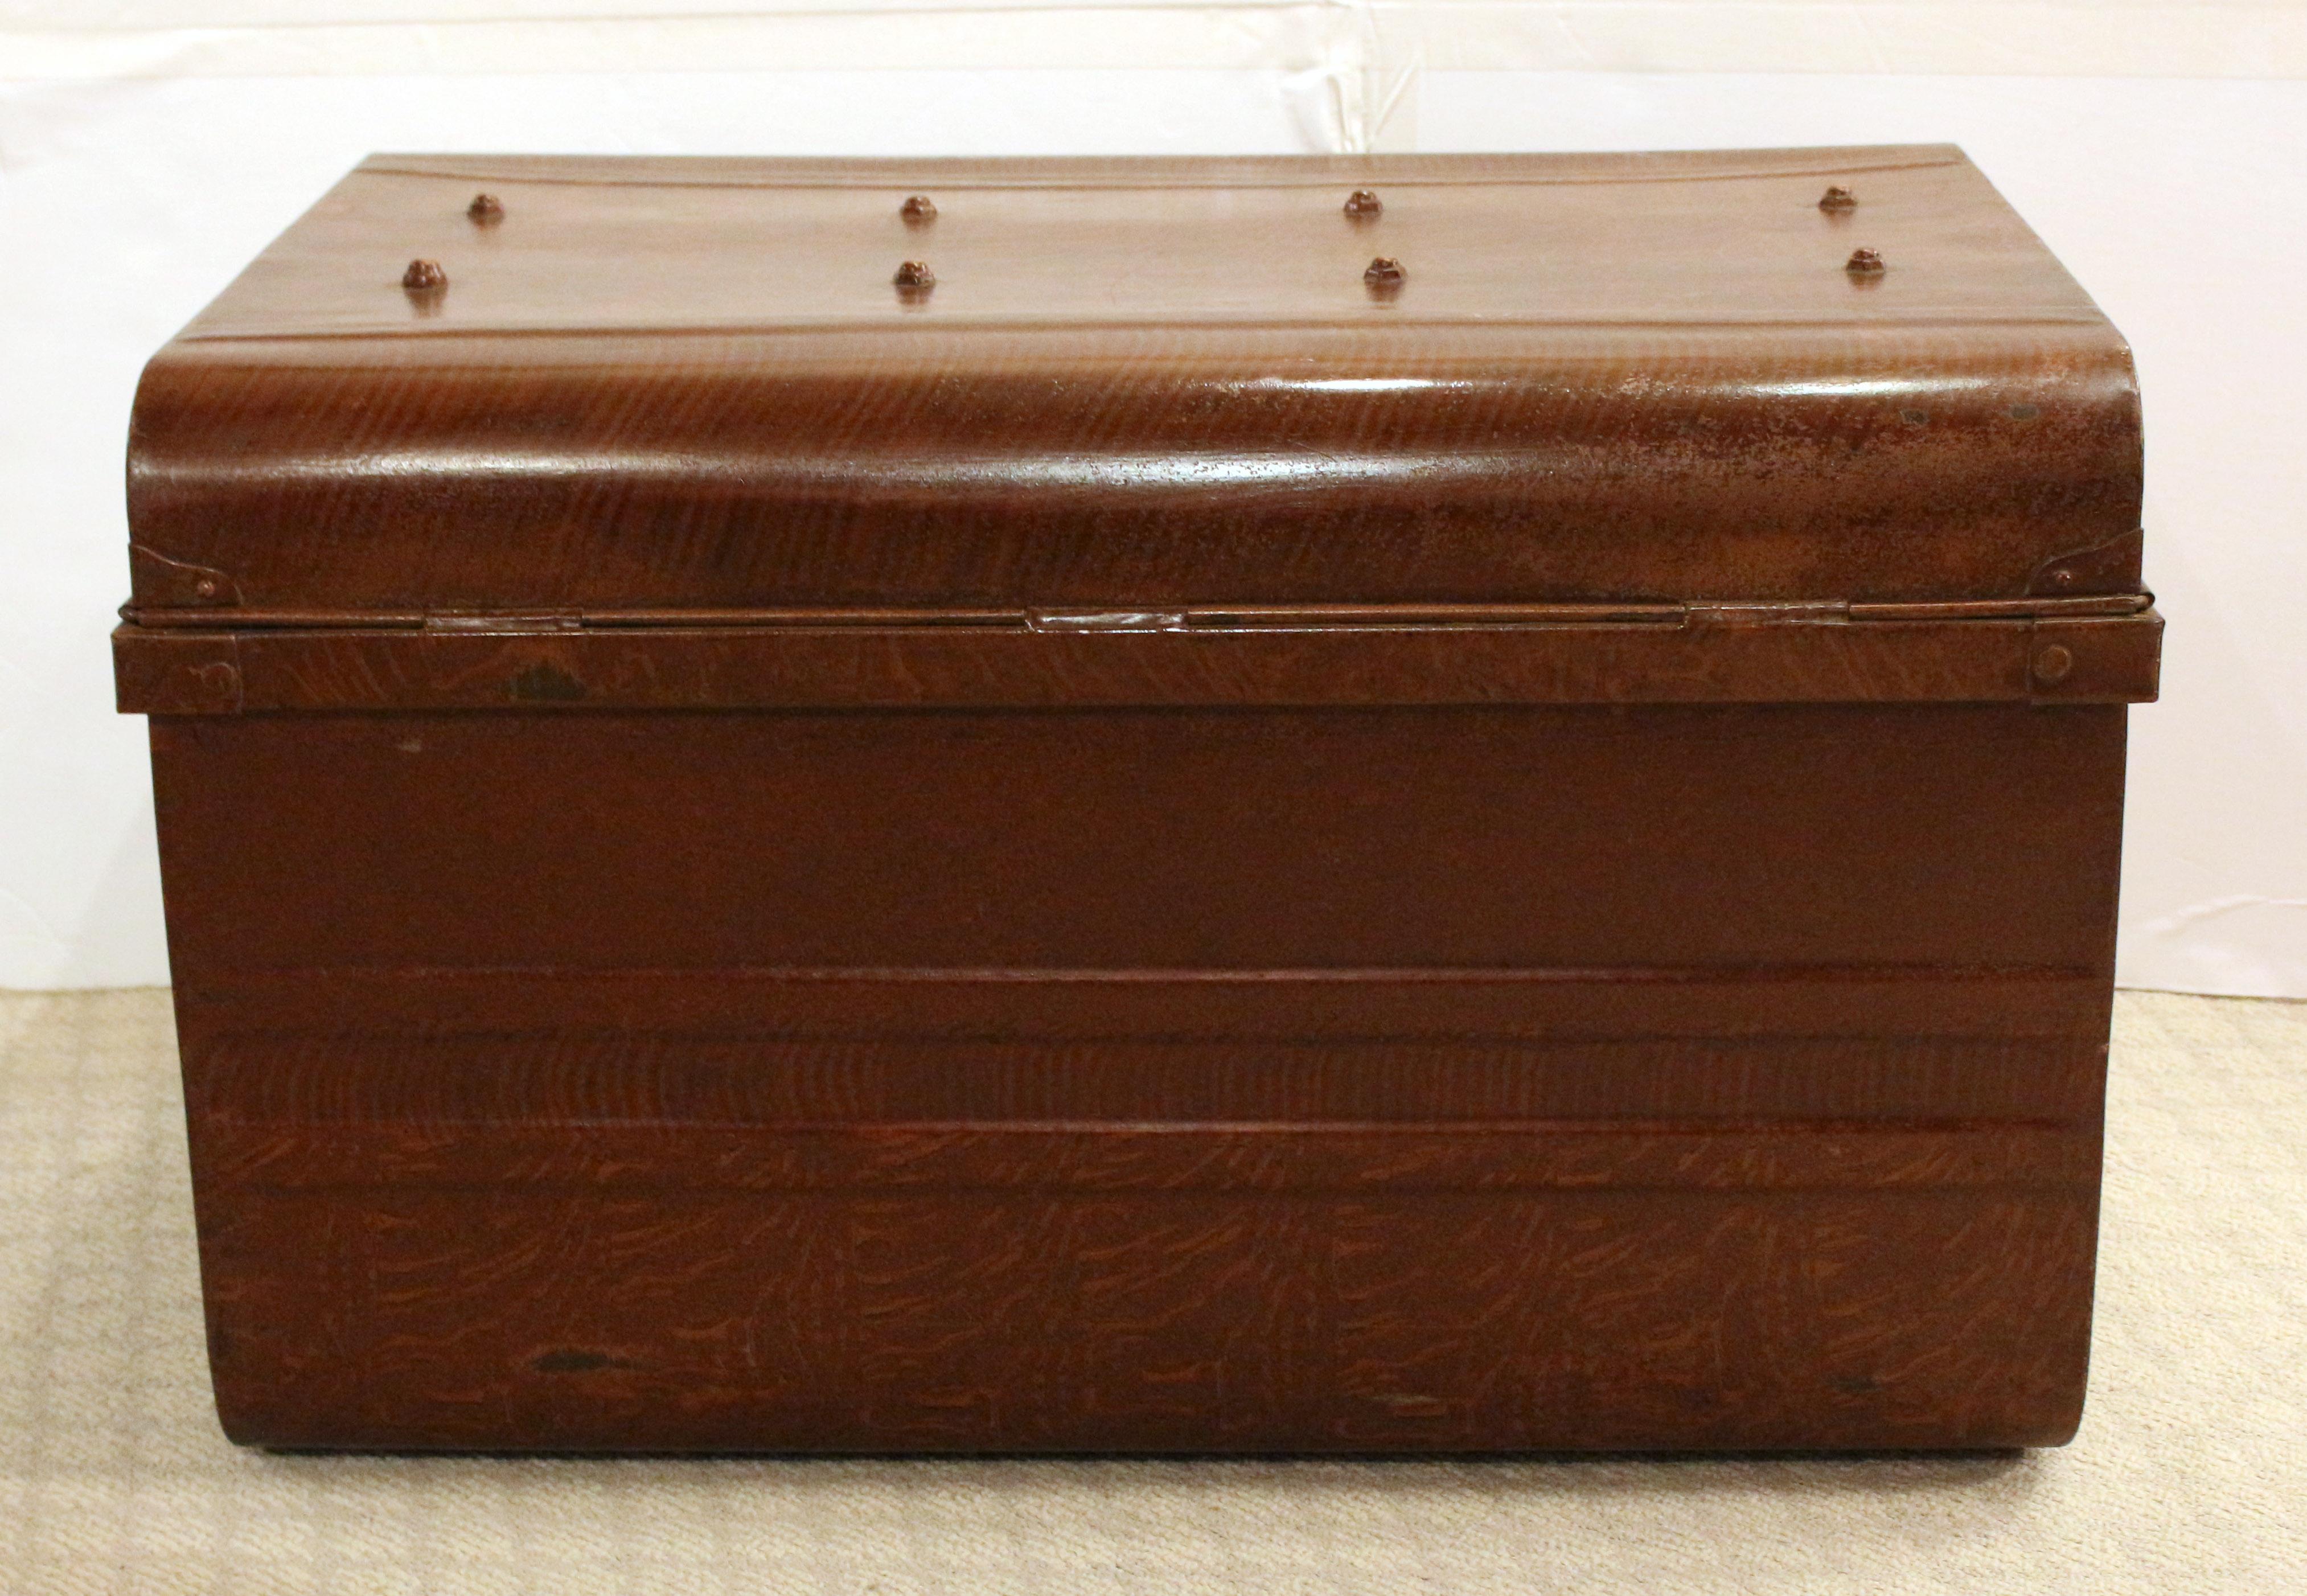 Late 19th to early 20th century steel trunk with original faux bois paint, English. Brass latch lock with shaped backplates. Swing handles. Red painted interior. Ideal as a coffee table. 30 1/2